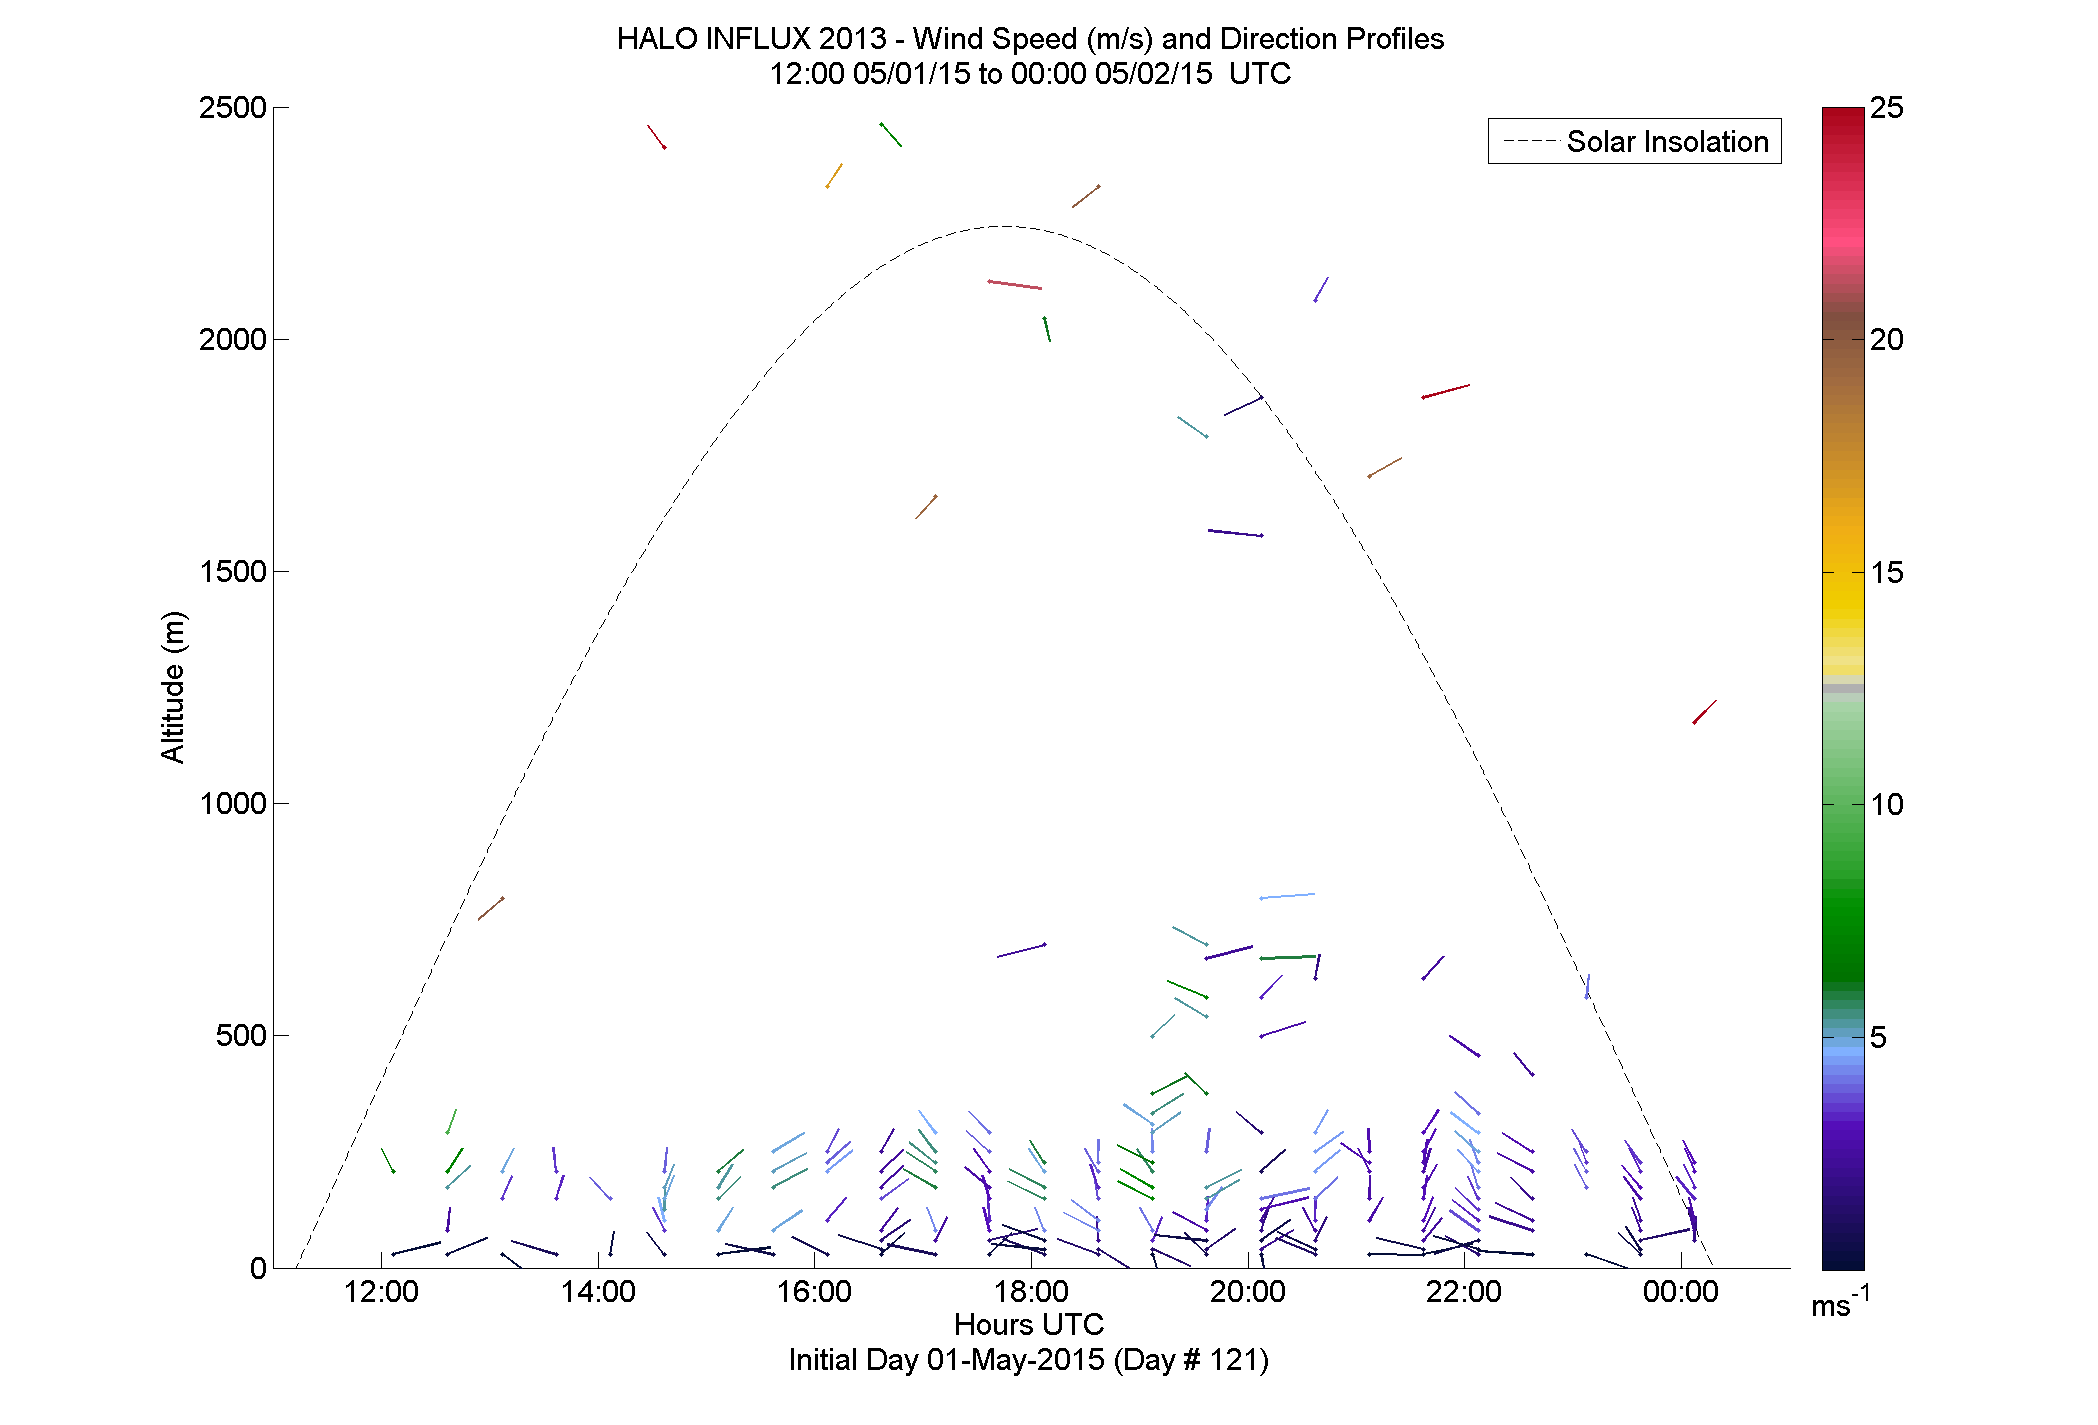 HALO speed and direction profile - May 1 pm